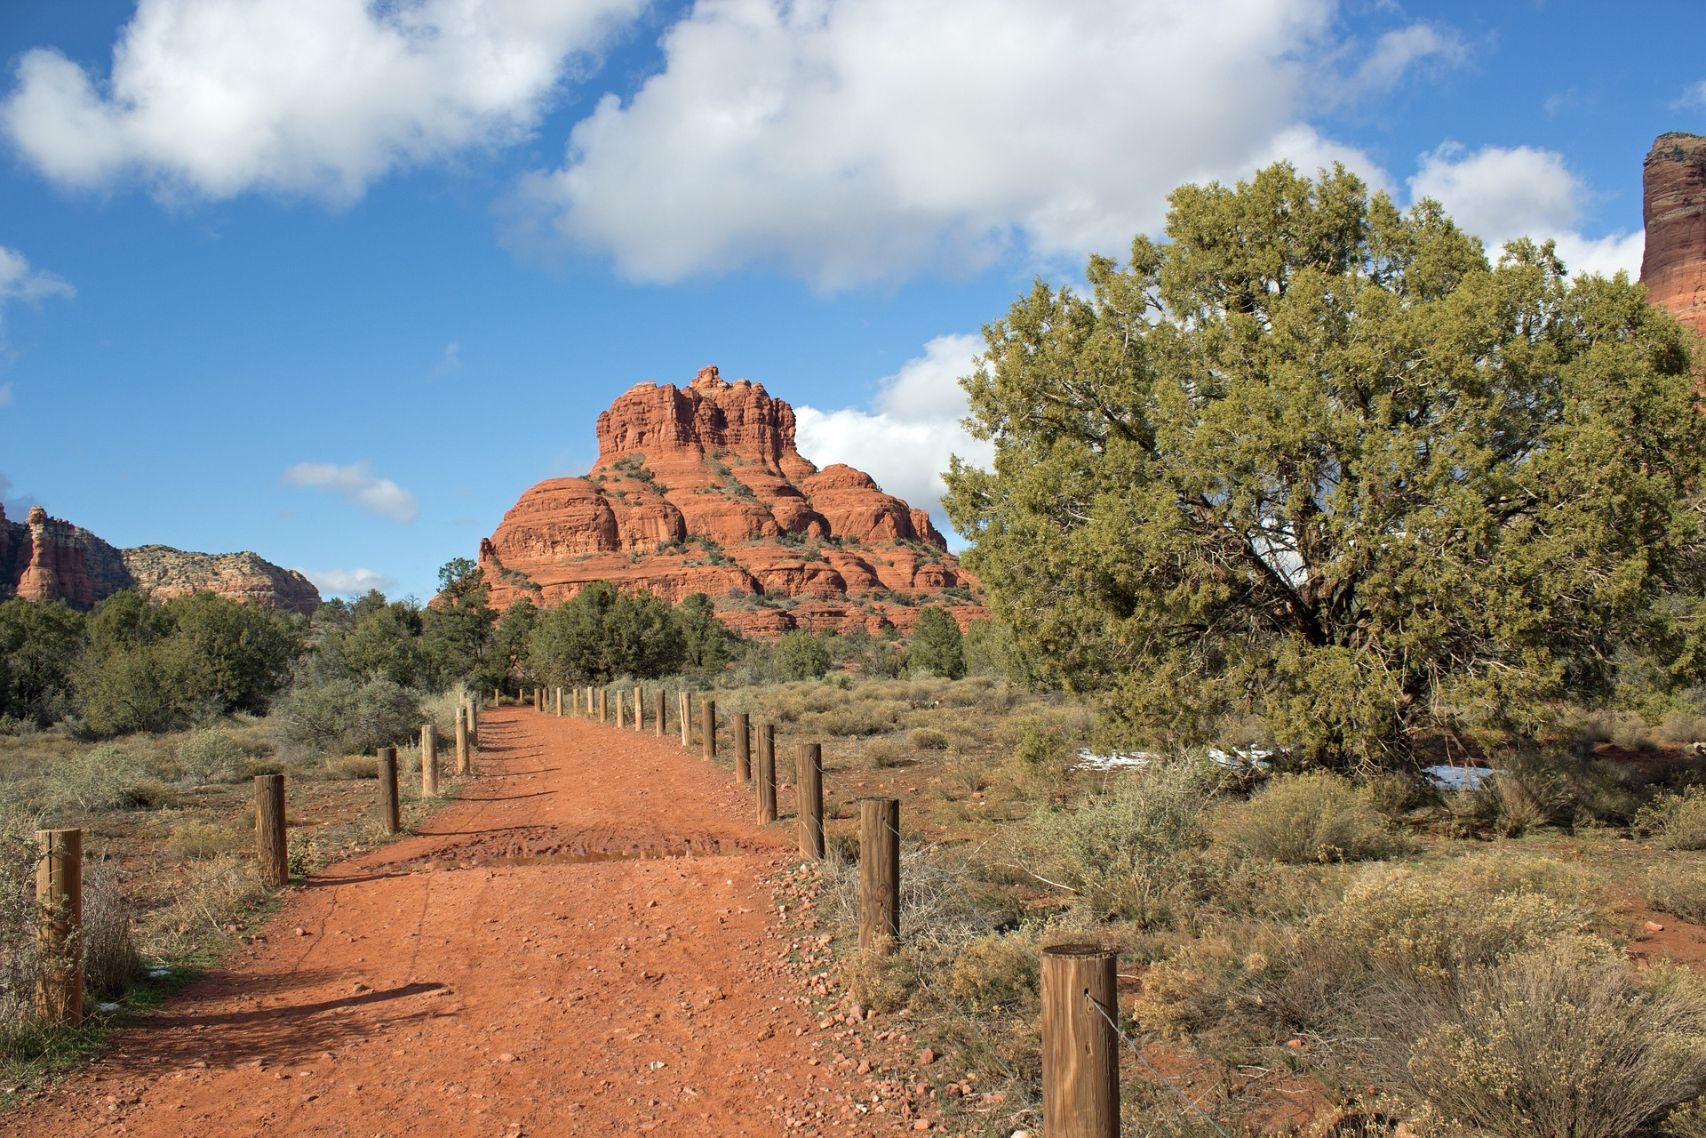 Live in Arizona? Book a Staycation with Sedona.Org!